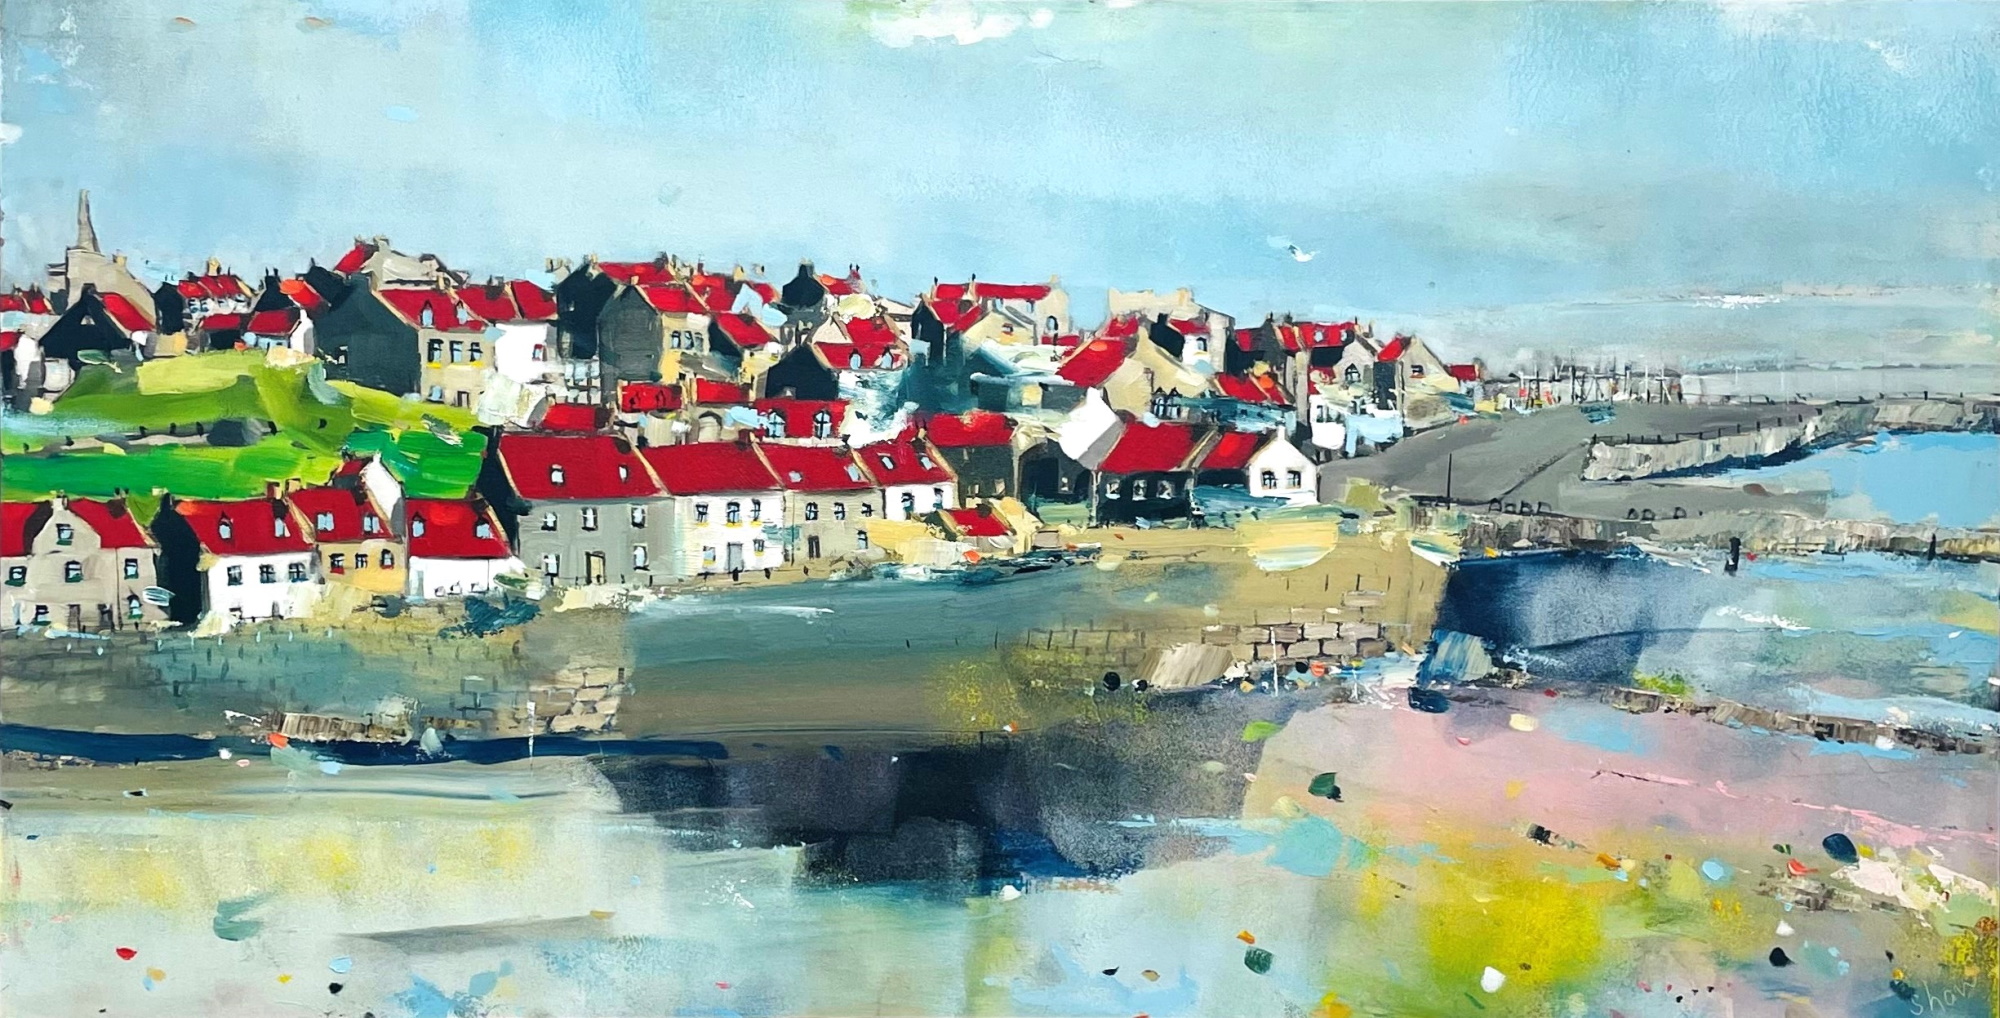 'Pittenweem Cottages' by artist Rob Shaw